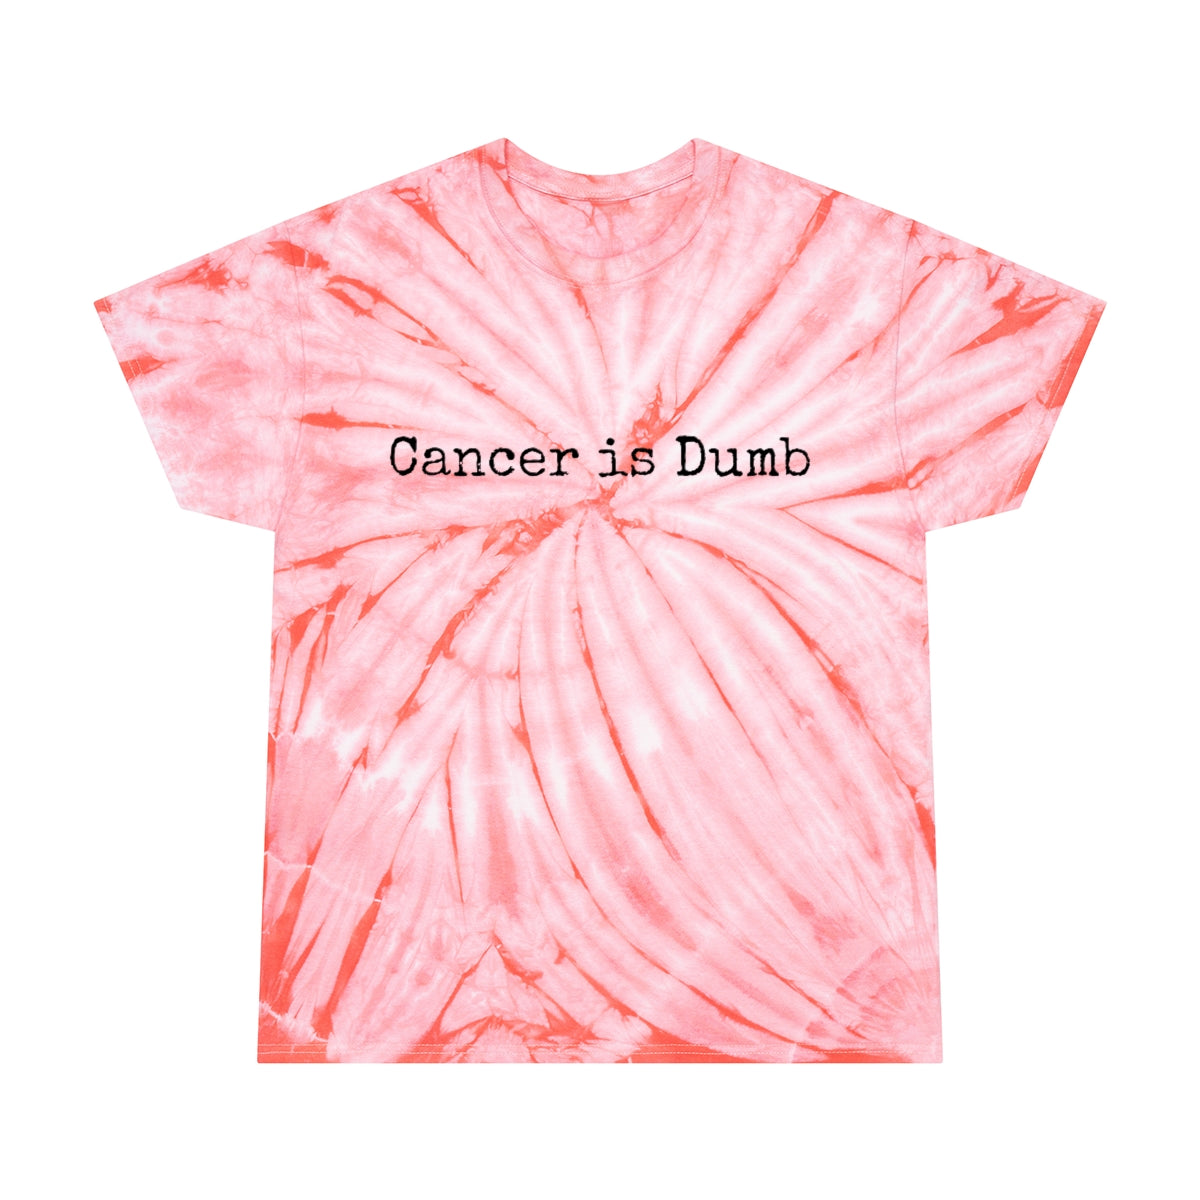 Tie-Dye Tee, Cyclone T Shirt tshirt Anti Cancer Cancer is Dumb Survivor Support Humorous Funny